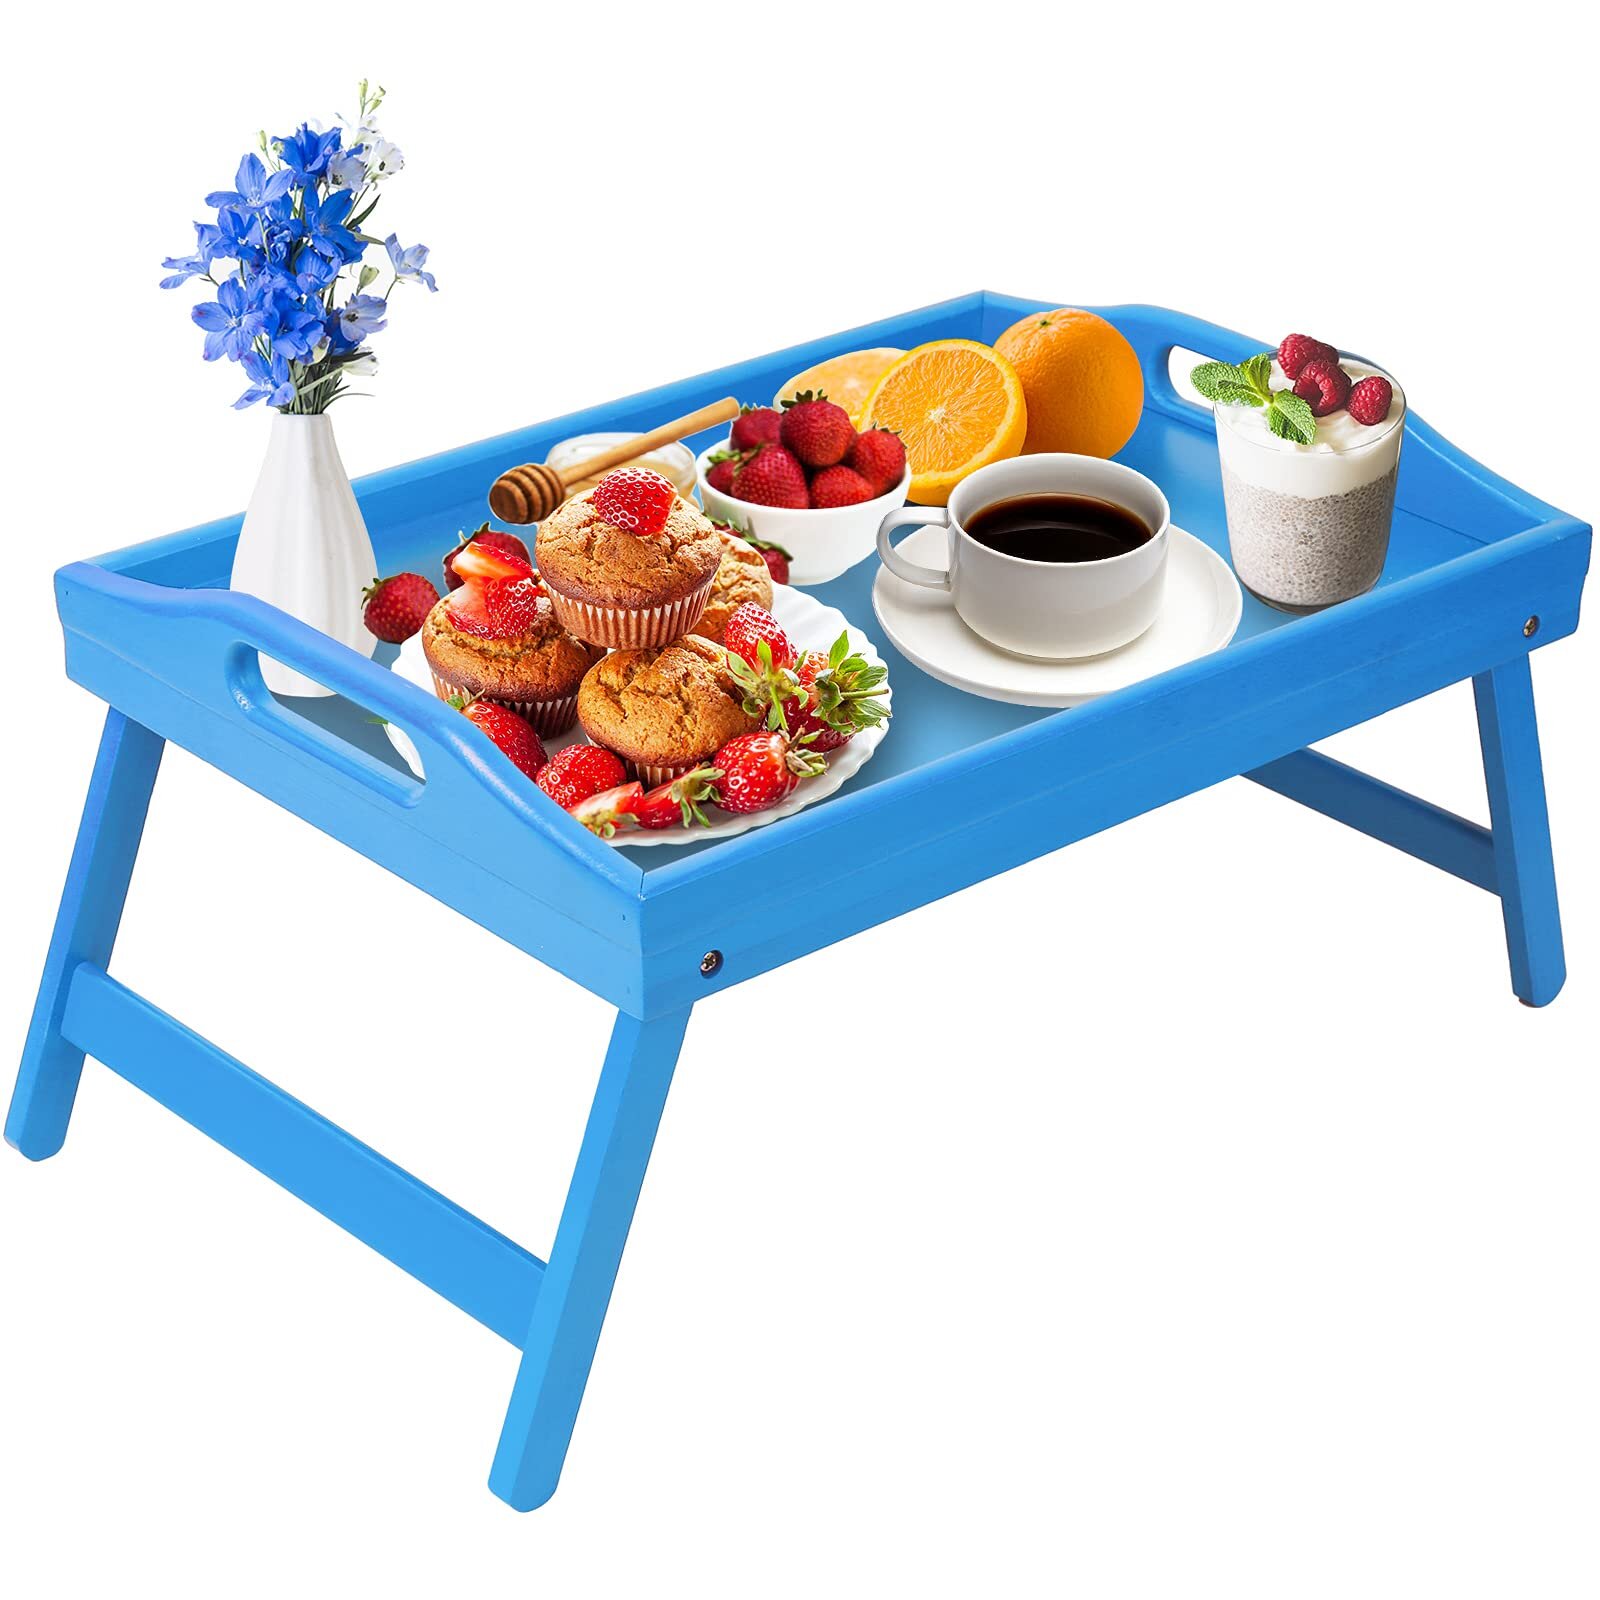 Foldable Bamboo Wood Dinner Table Coffee Tea Tray Stand Serving Snack Portable